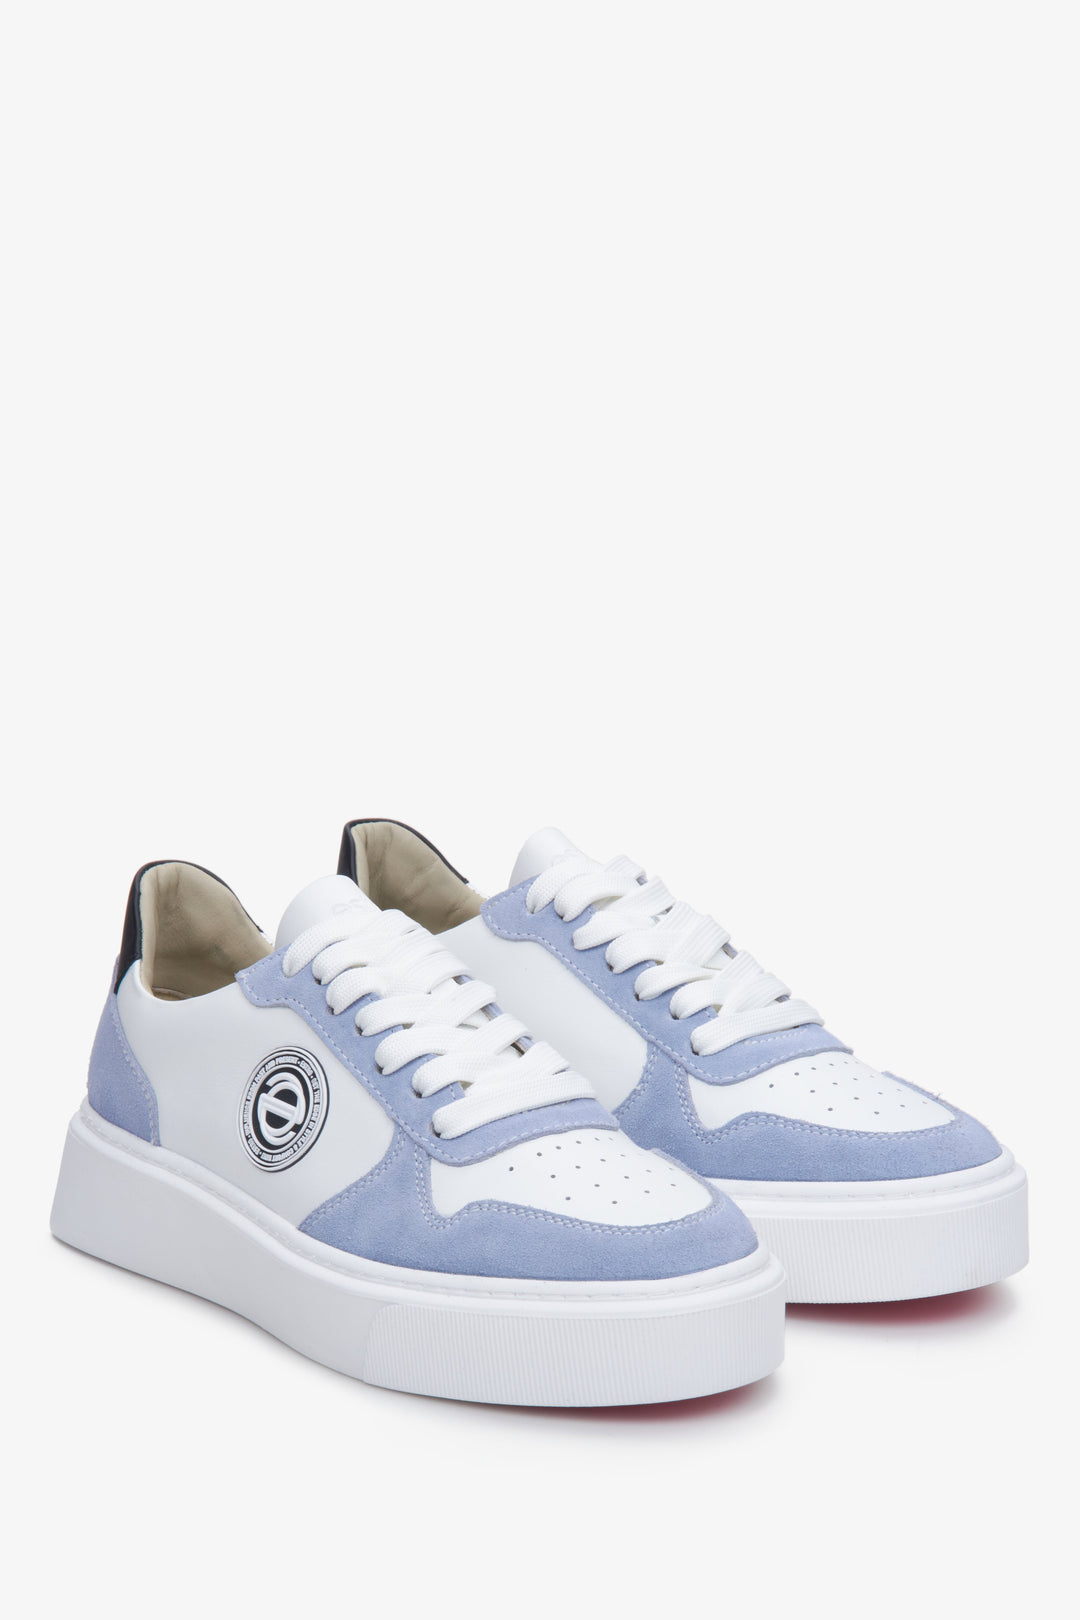 Blue and white sneakers for women, featuring leather and natural velvet - presentation of a shoe toe and sideline.